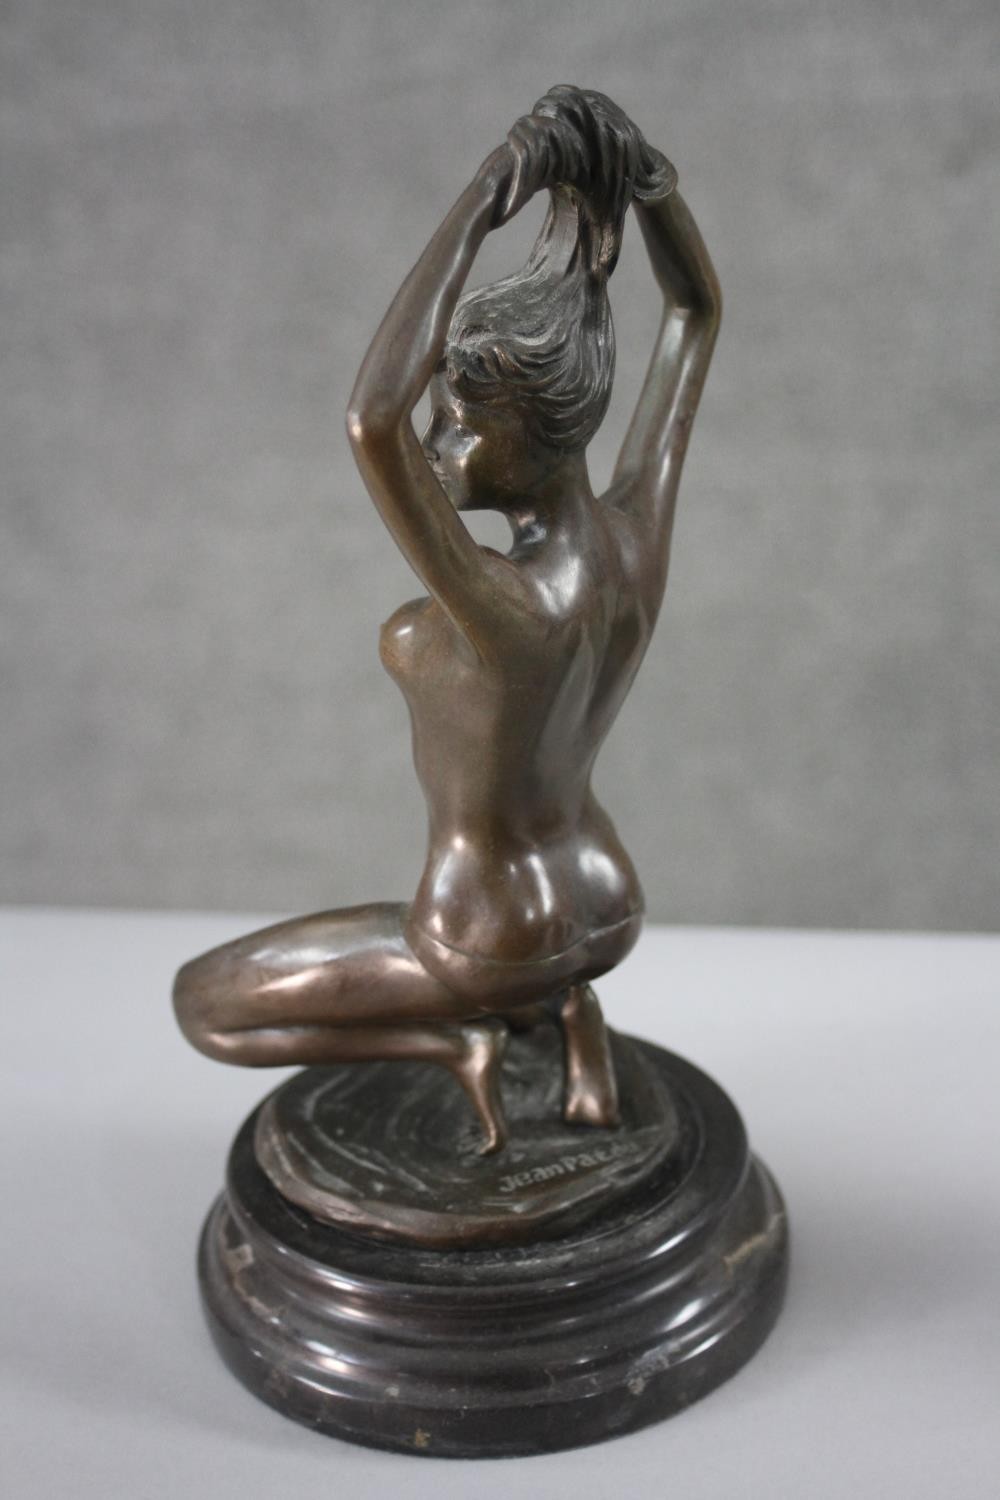 An erotic spelter figure of a kneeling nude woman holding up her hair. H.30 W.16 cm. - Image 2 of 3